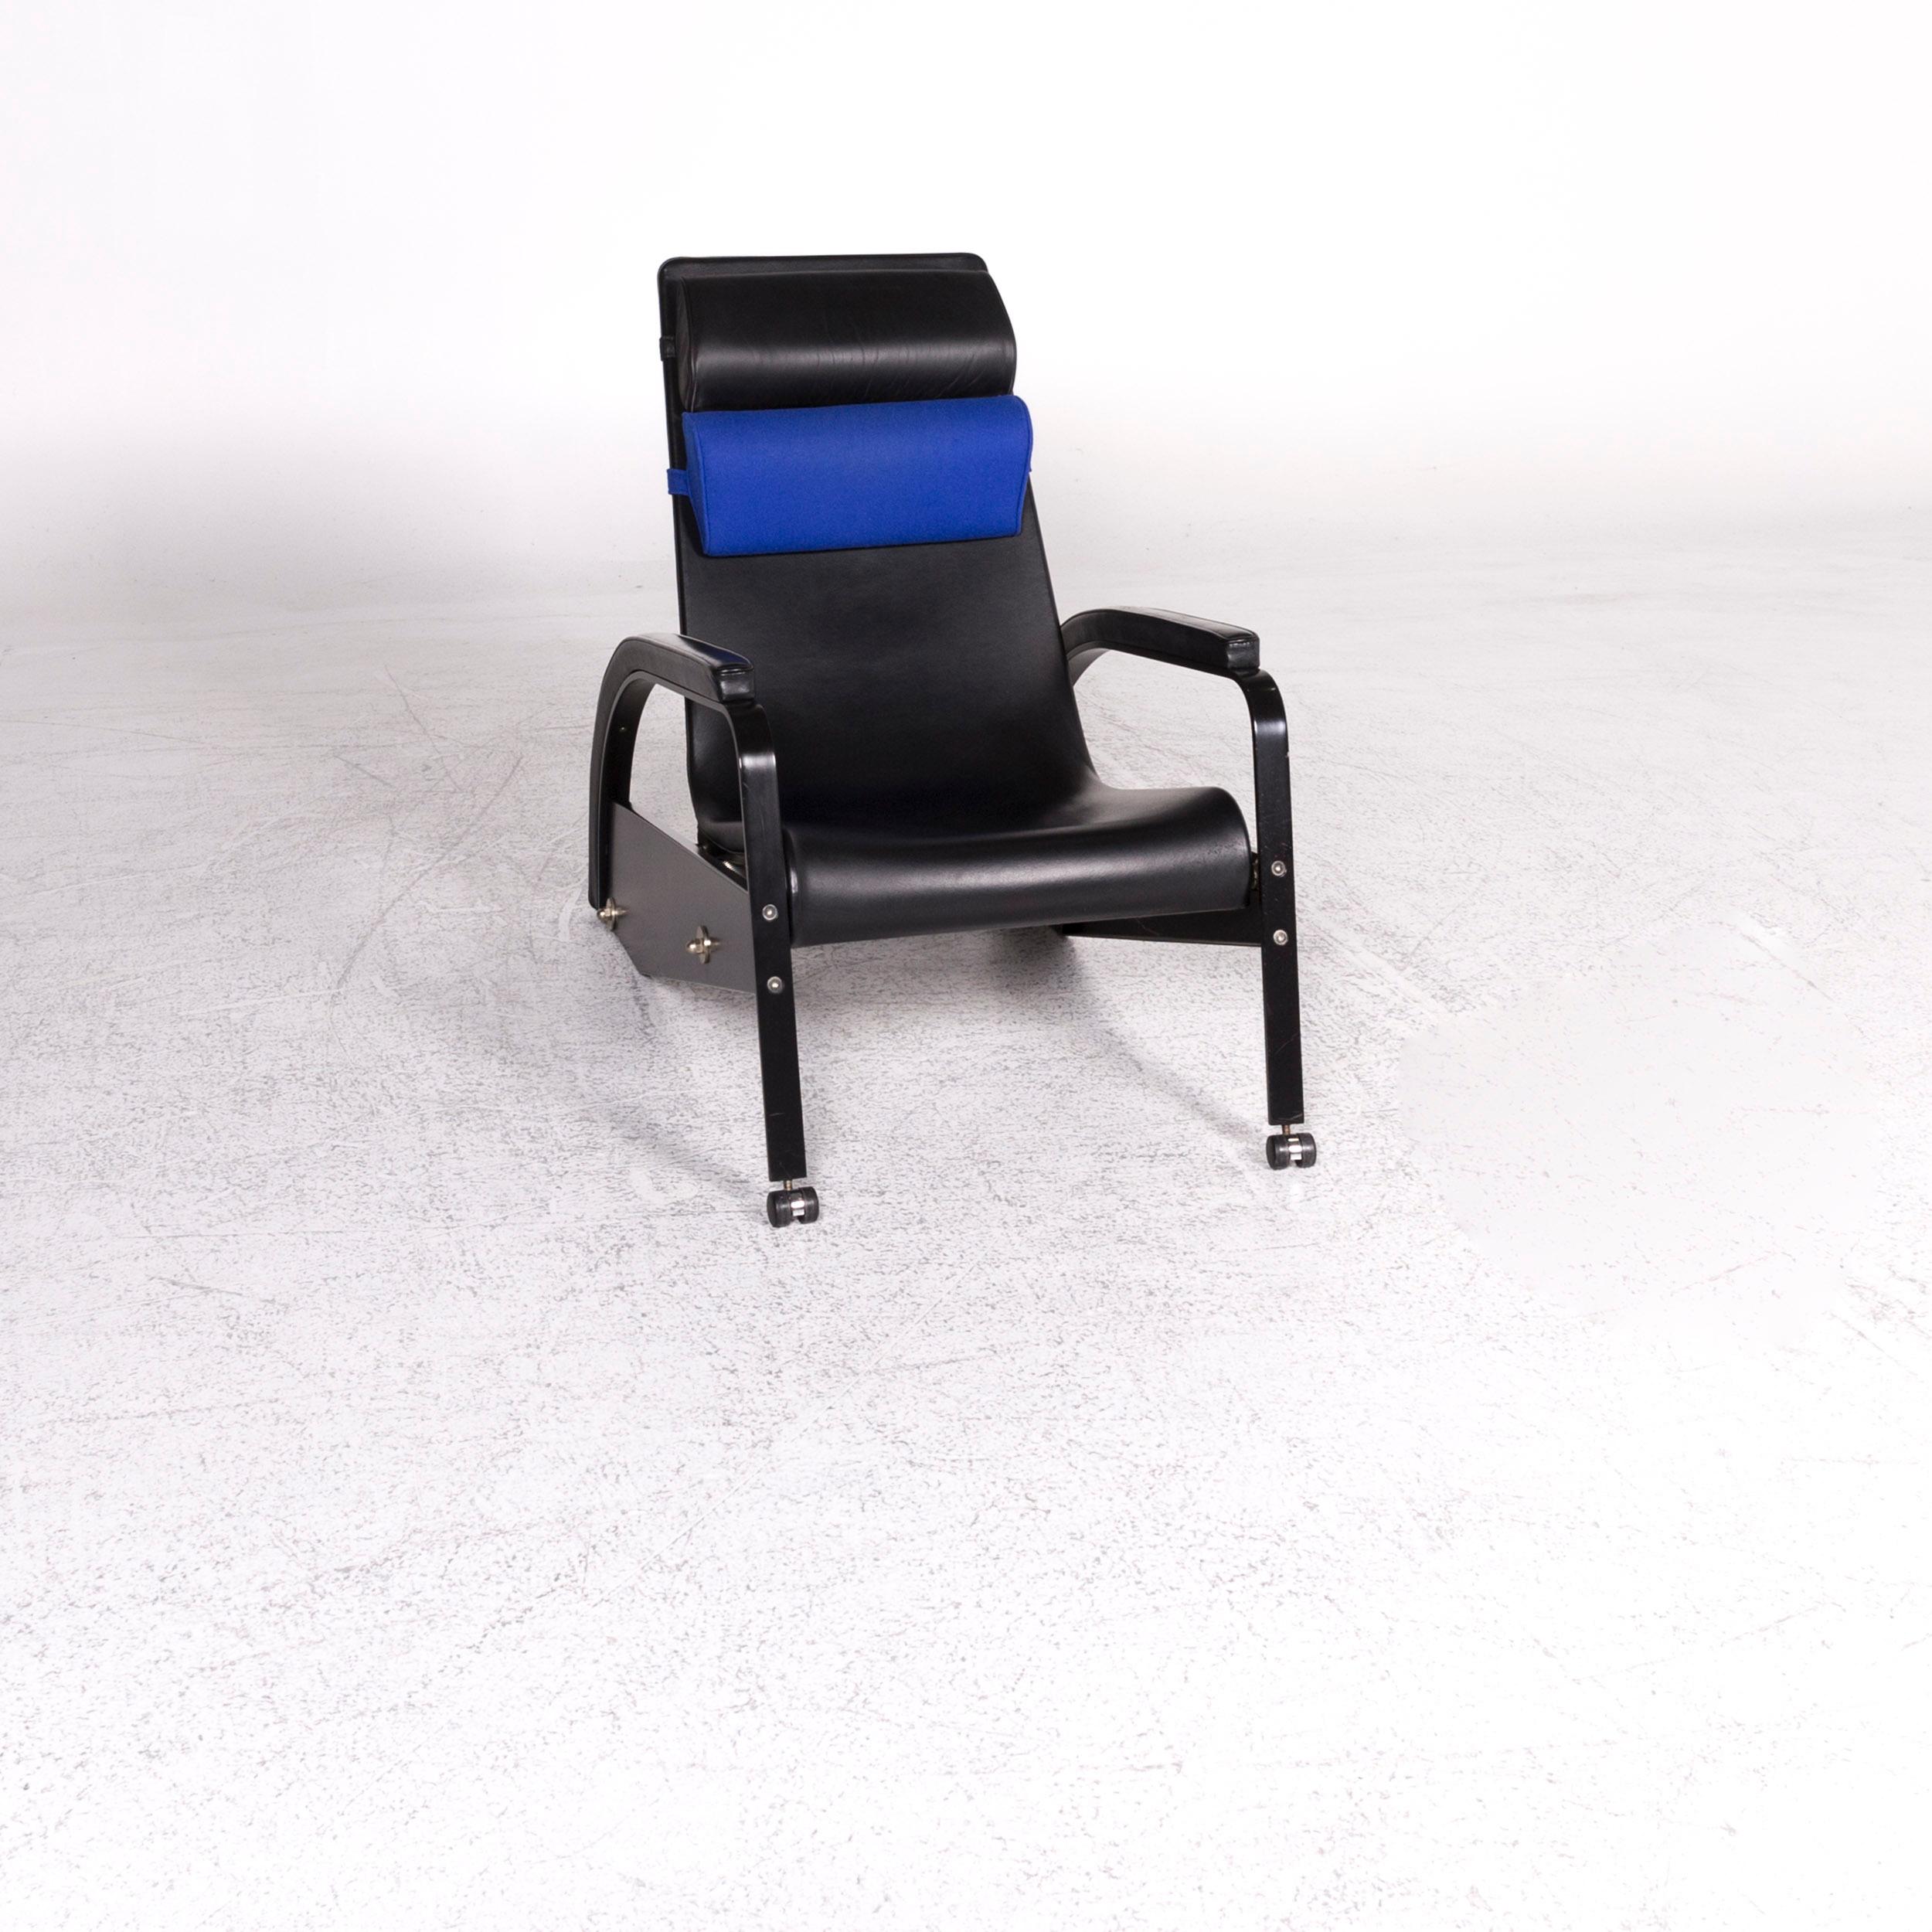 We bring to you a Tecta D 80 leather armchair black relax.

 Product measurements in centimeters:
 
Depth: 108
Width: 64
Height: 92
Seat-height: 36
Rest-height: 56
Seat-depth: 52
Seat-width: 51
Back-height: 60.
 